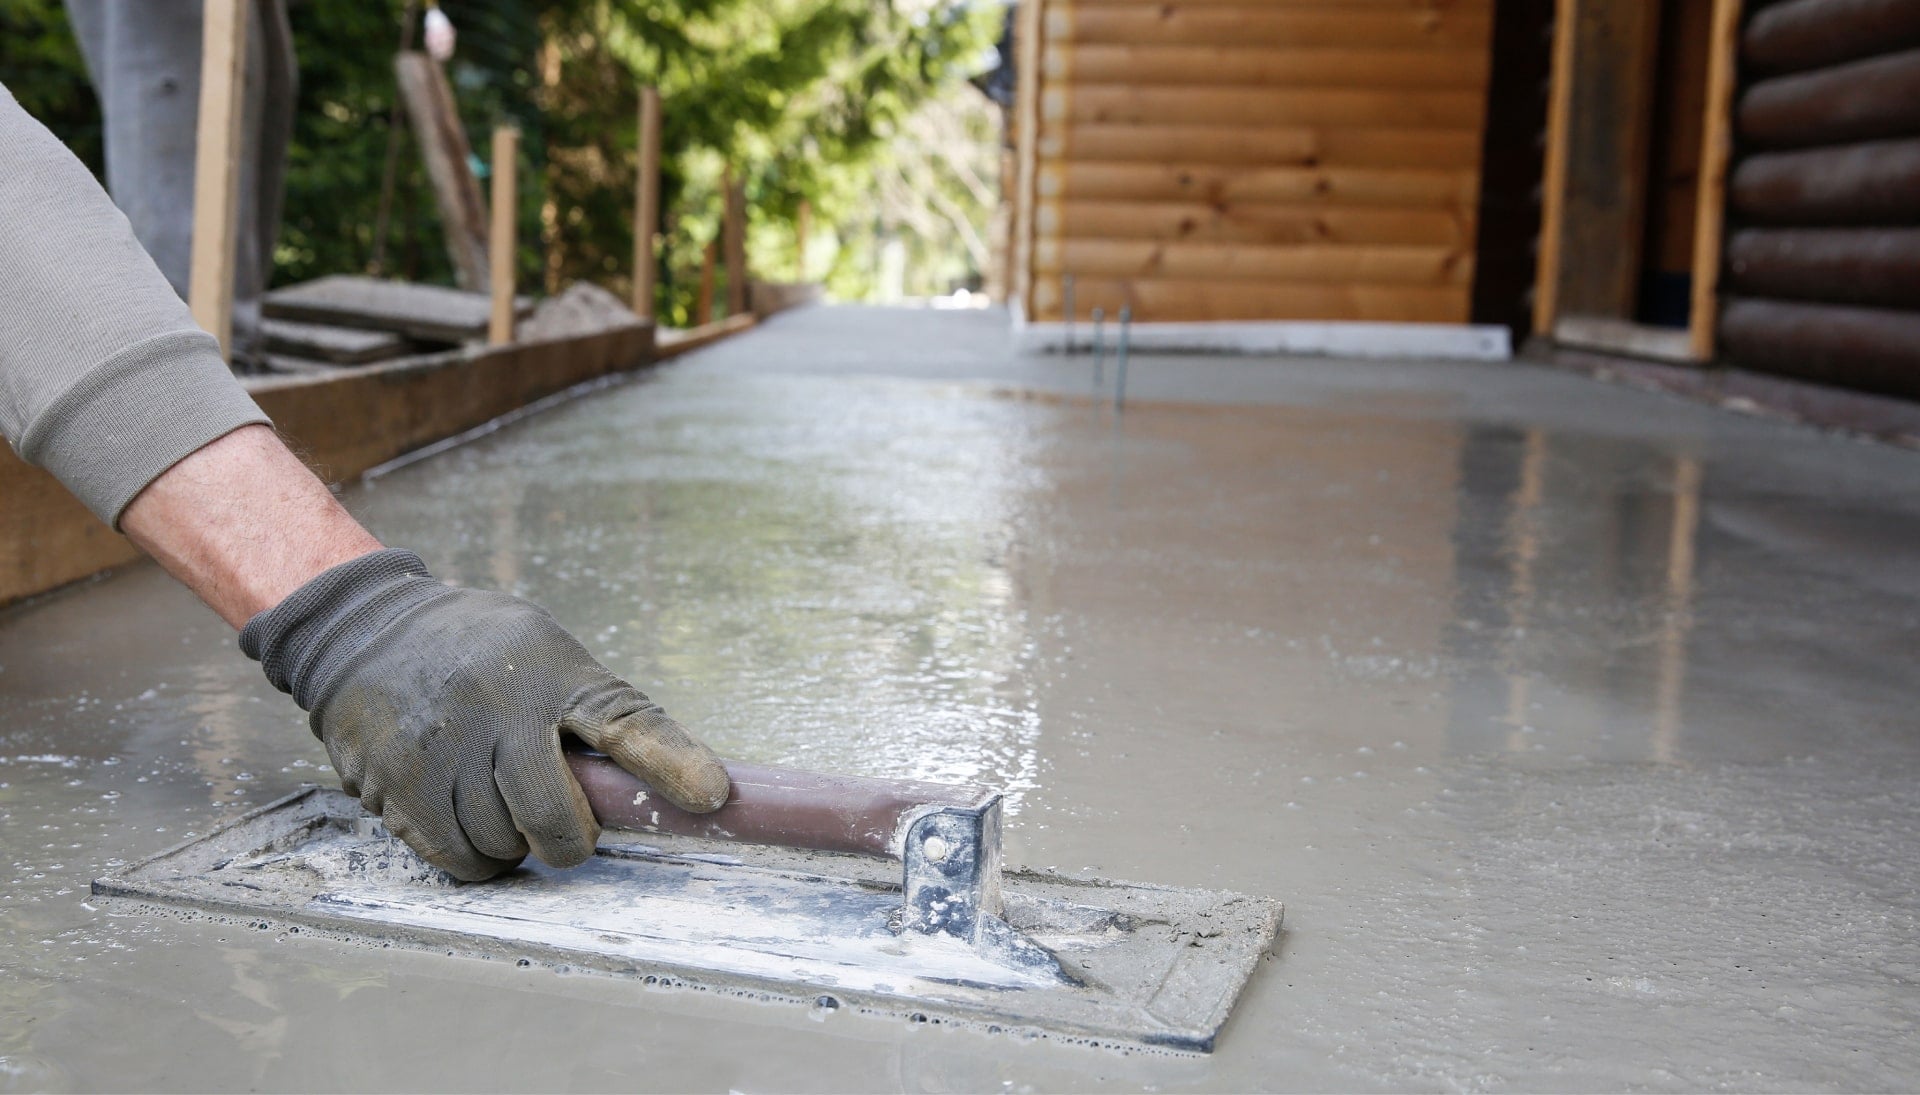 Smooth and Level Your Floors with Precision Concrete Floor Leveling Services in Arlington, TX - Eliminate Uneven Surfaces, Tripping Hazards, and Costly Damages with State-of-the-Art Equipment and Skilled Professionals.